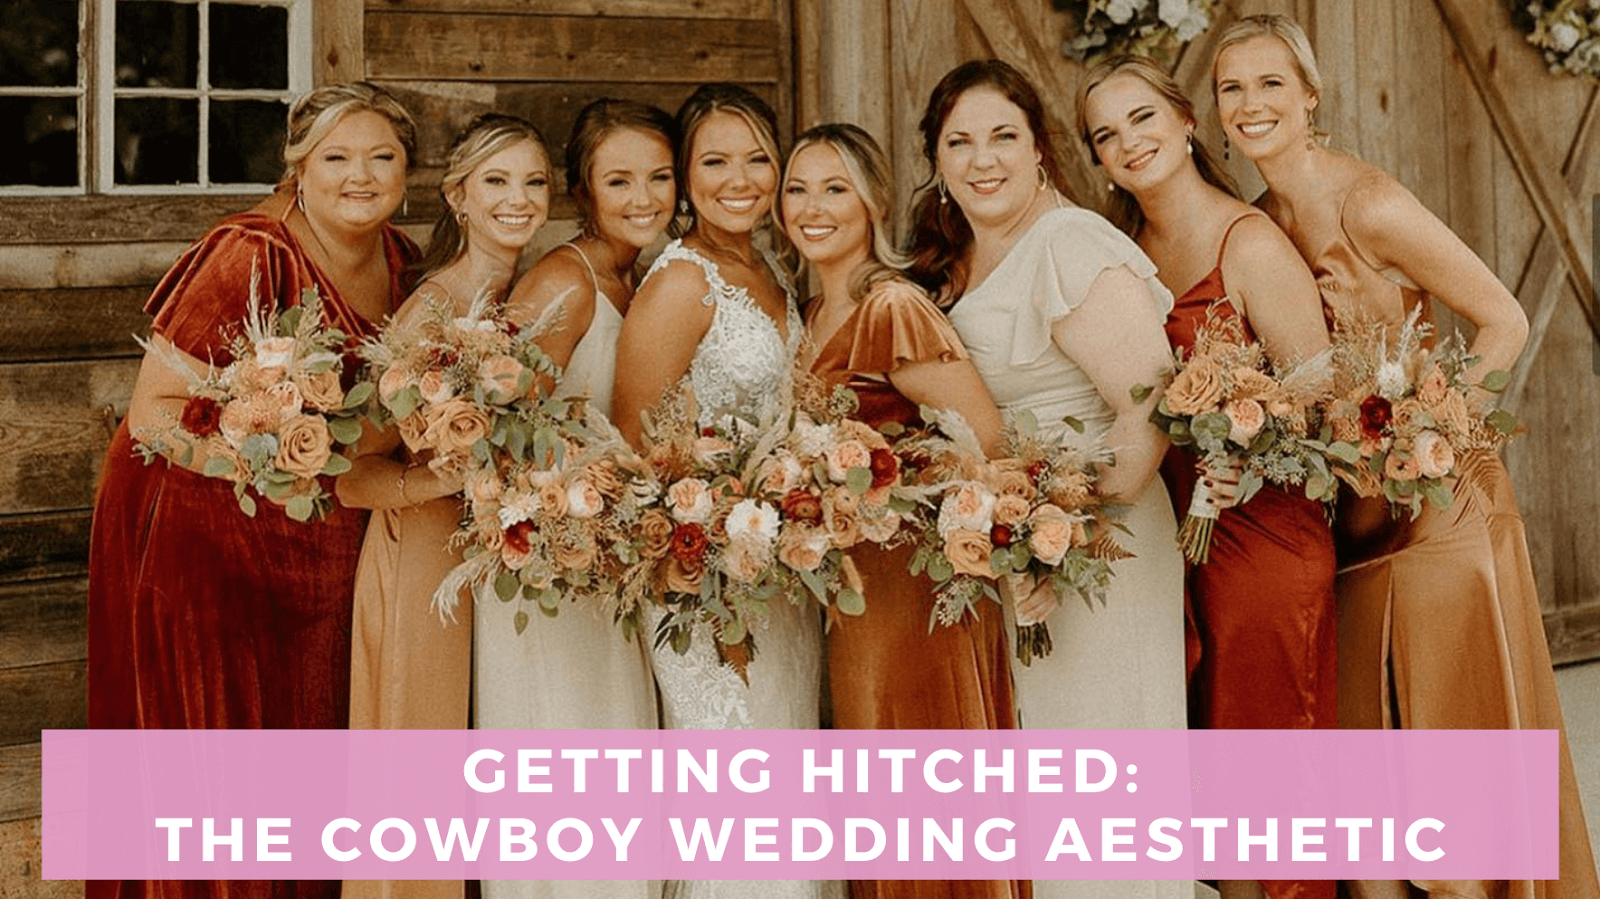 The Brides Wore Custom Cowboy-Inspired Outfits for Their Fall